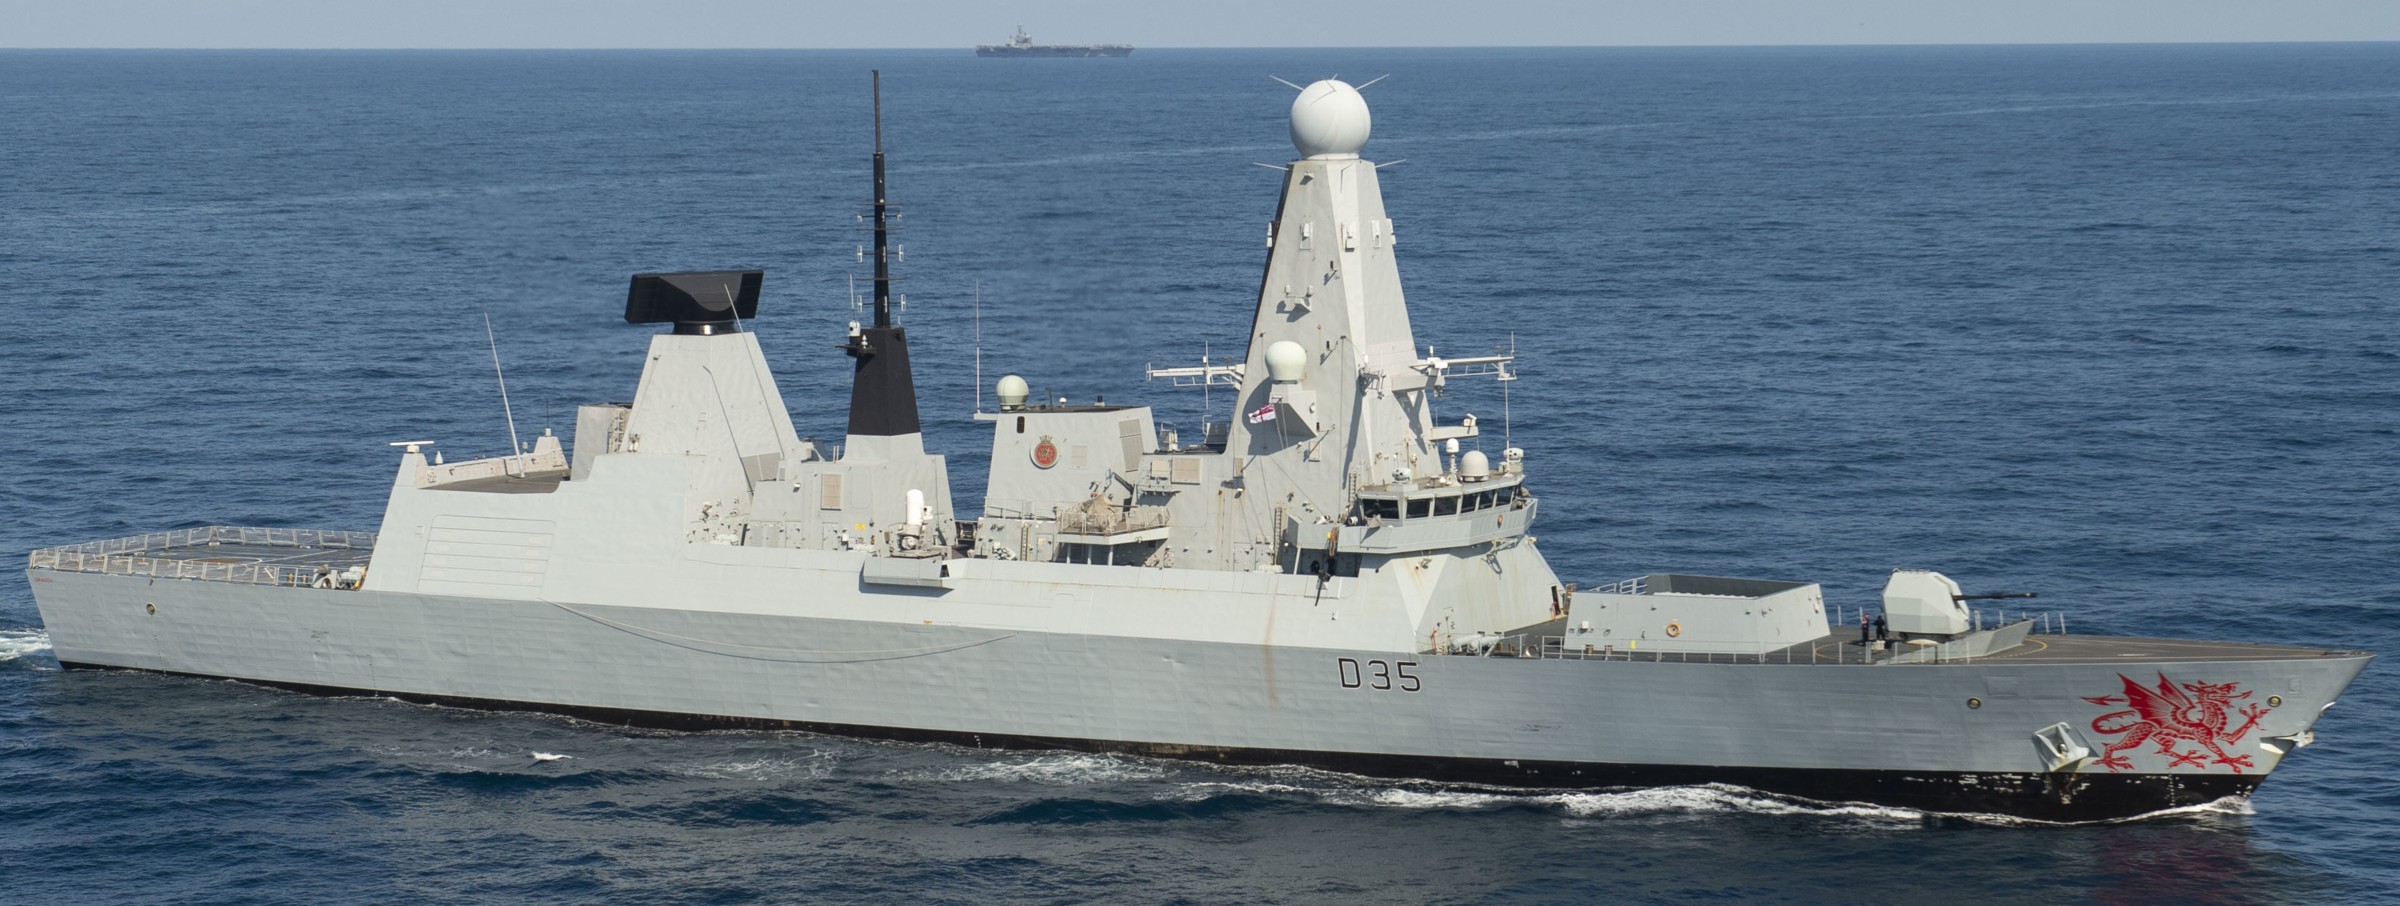 hms dragon d-35 type 45 daring class guided missile destroyer ddg royal navy sea viper paams 32